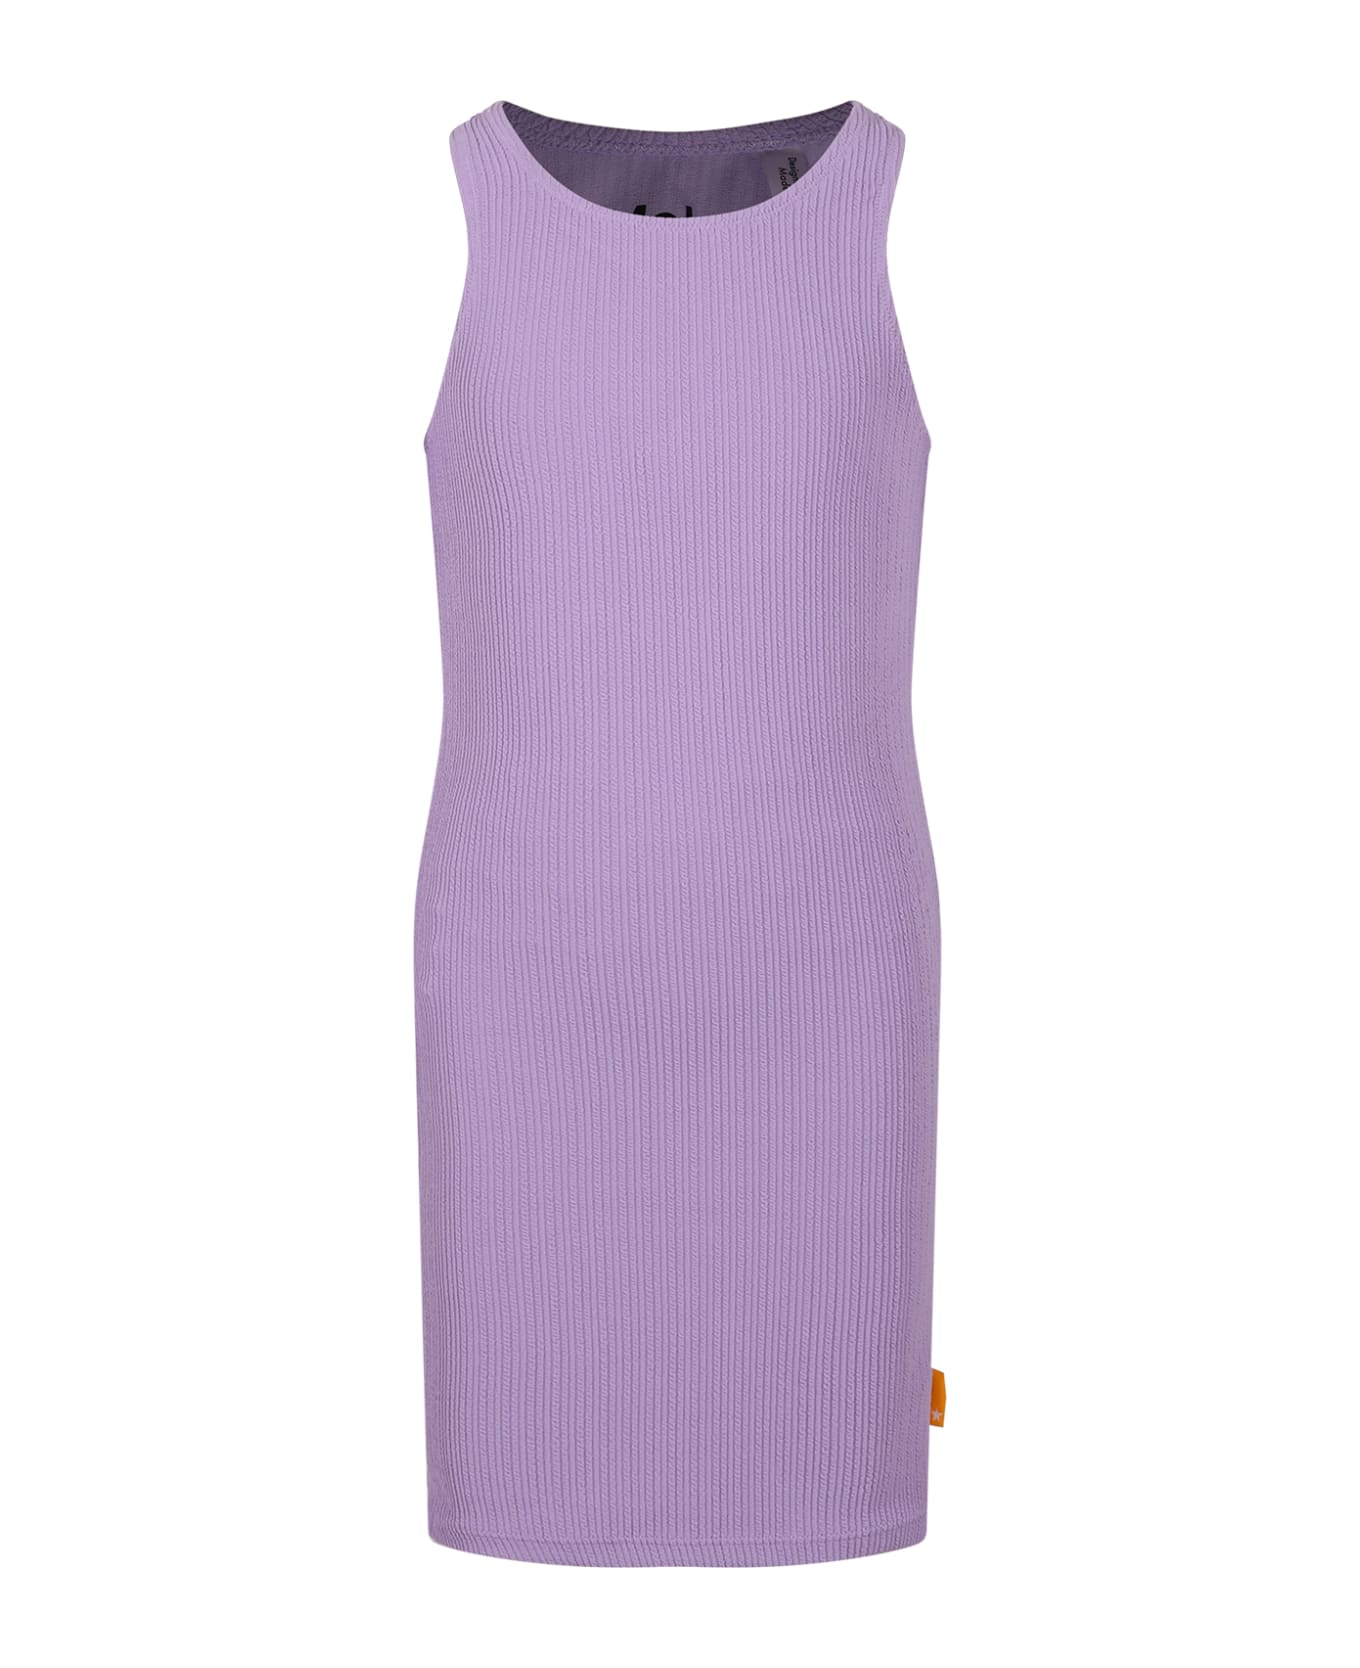 Molo Purple Beach Cover-up For Girl - Violet